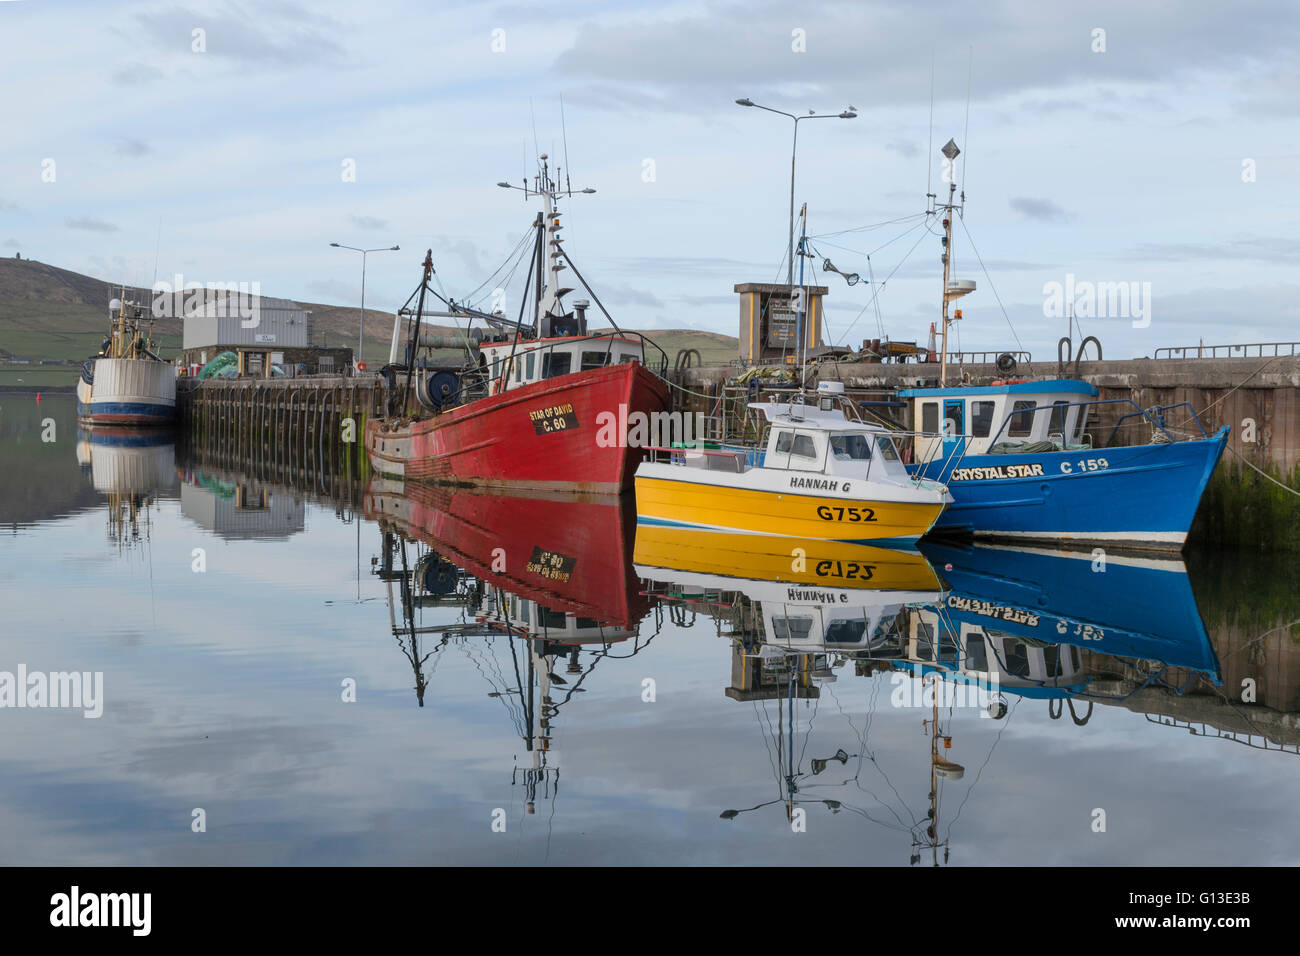 Early morning tranquility offering scenic reflections at Dingle harbor, Dingle Bay, County Kerry, Munster, Republic of Ireland. Stock Photo